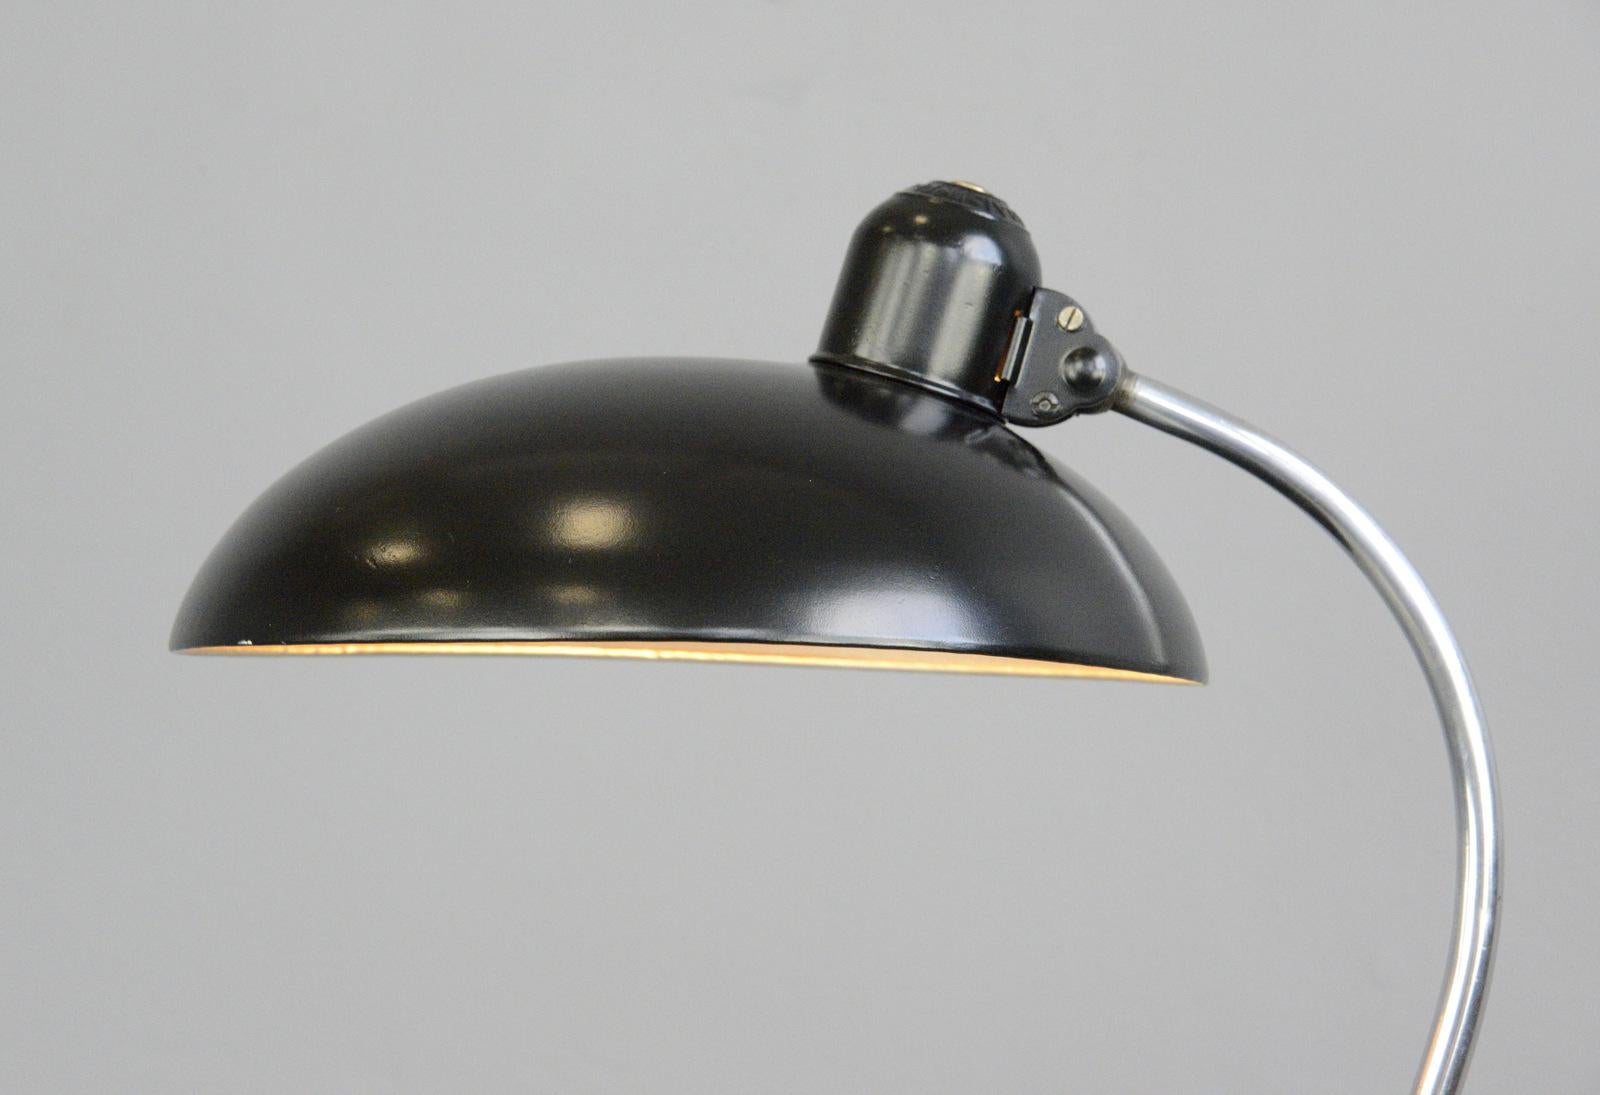 Model 6630 table lamp by Kaiser Idell, circa 1930s

- Chrome S shaped arm
- Steel shade with Kaiser Idell relief branding
- Takes E27 fitting bulbs
- Adjustable arm and shade
- Designed by Christian Dell
- Produced by Kaiser Idell
- Model